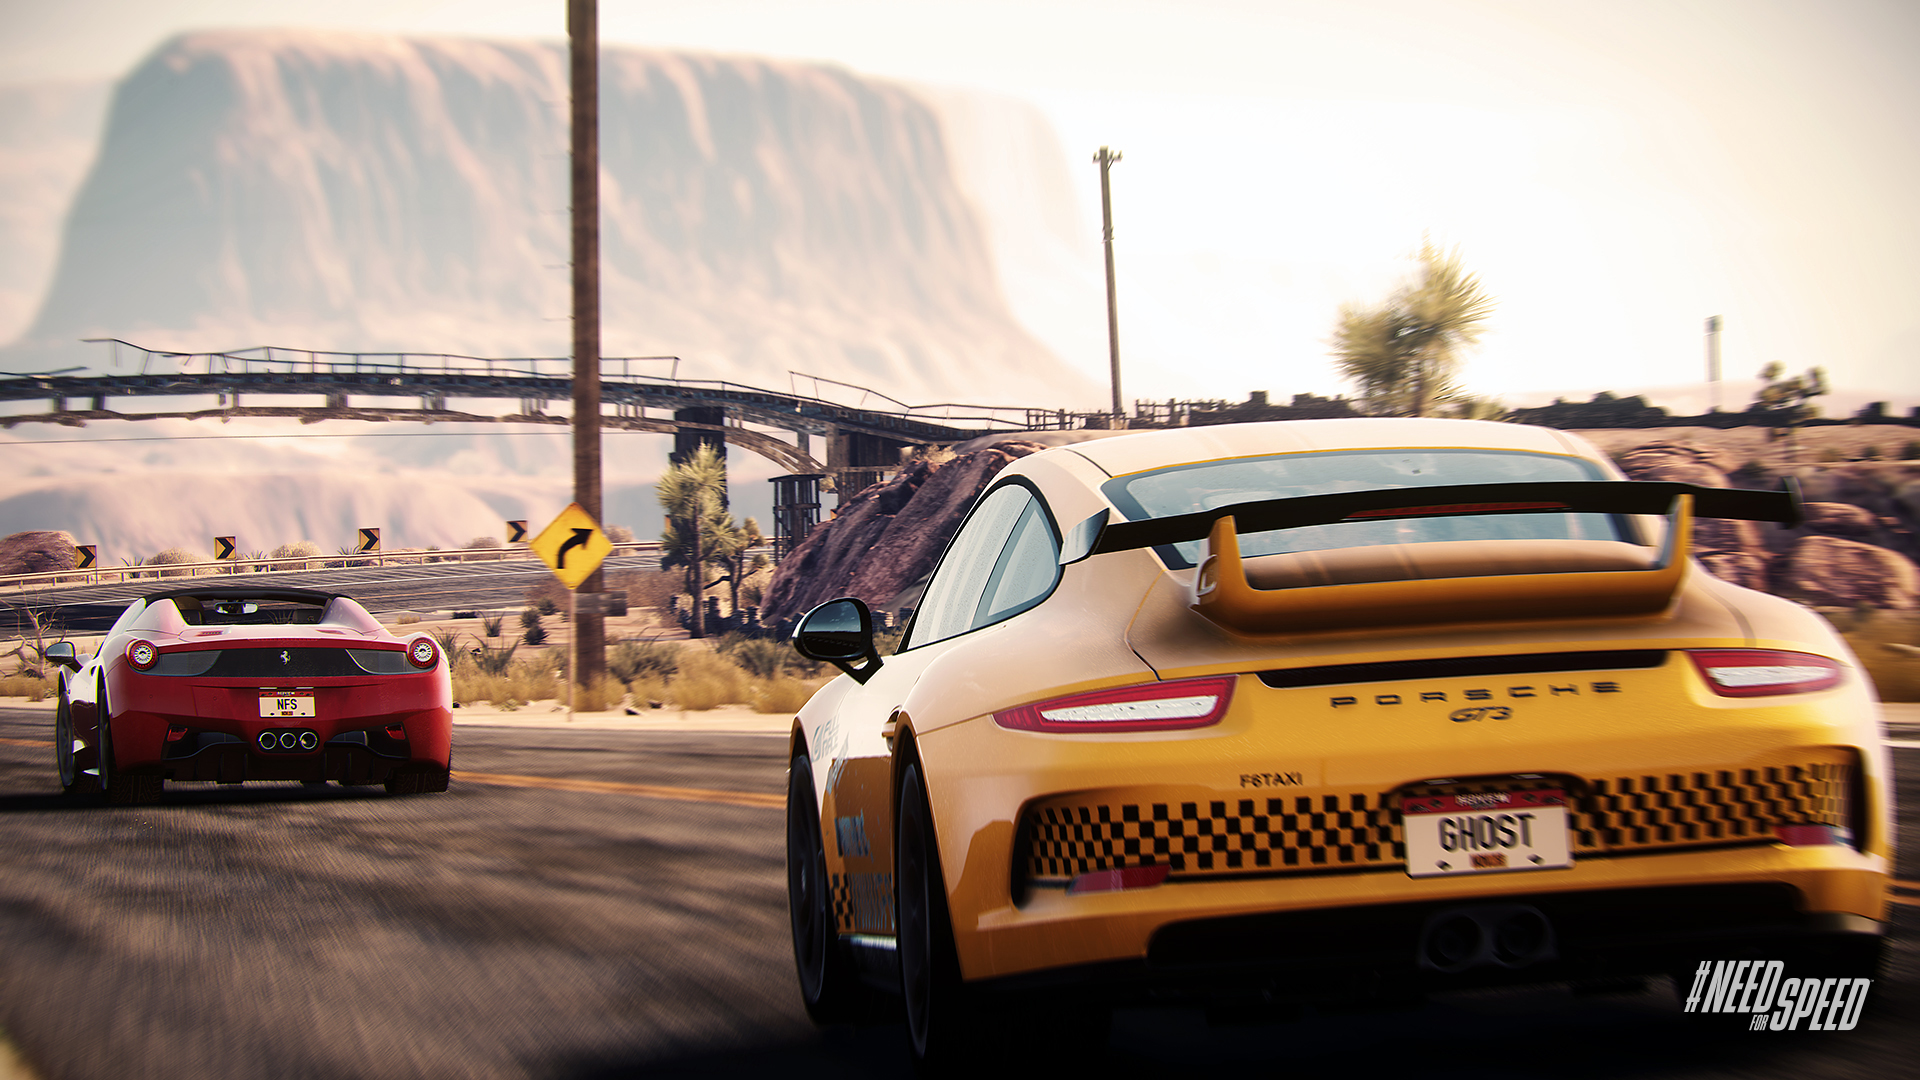 Need For Speed Rivals review – police action